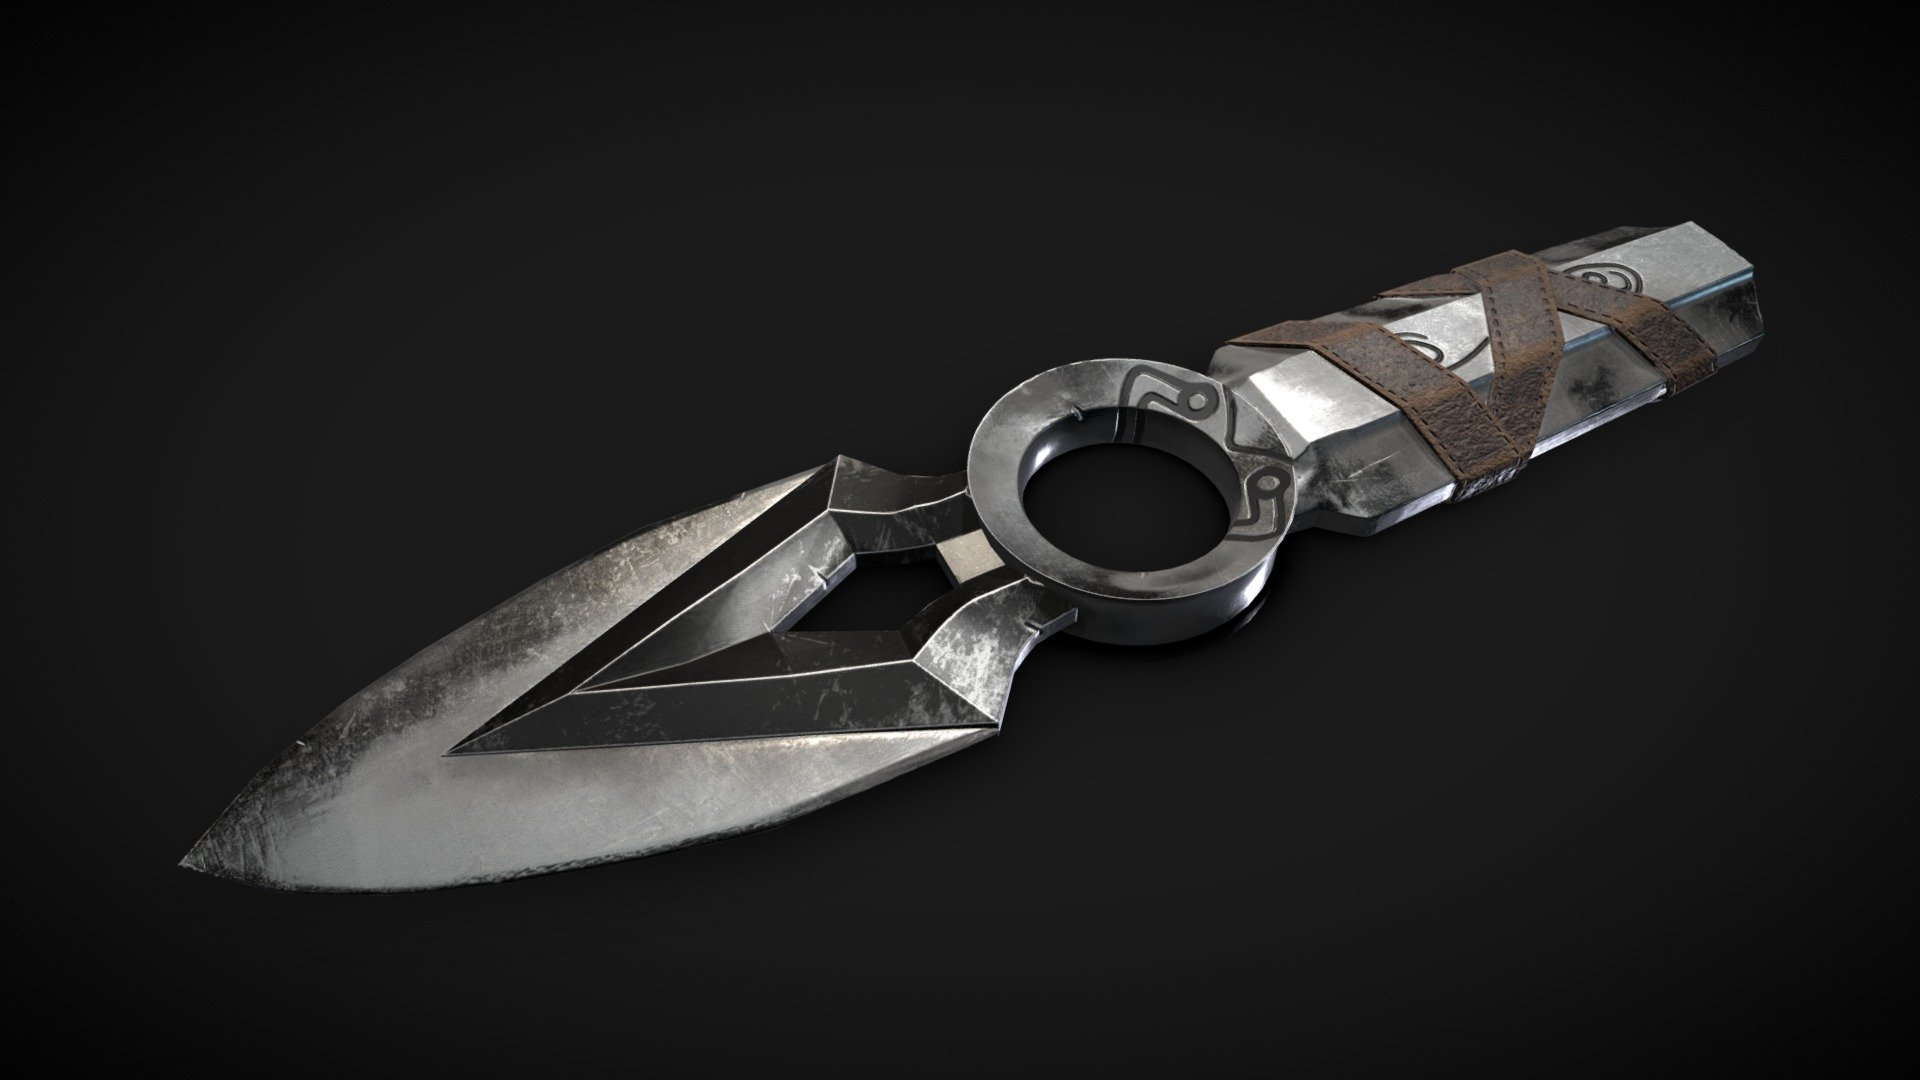 Jett knife for render. It can be adapted for 3D printing maybe 3d model